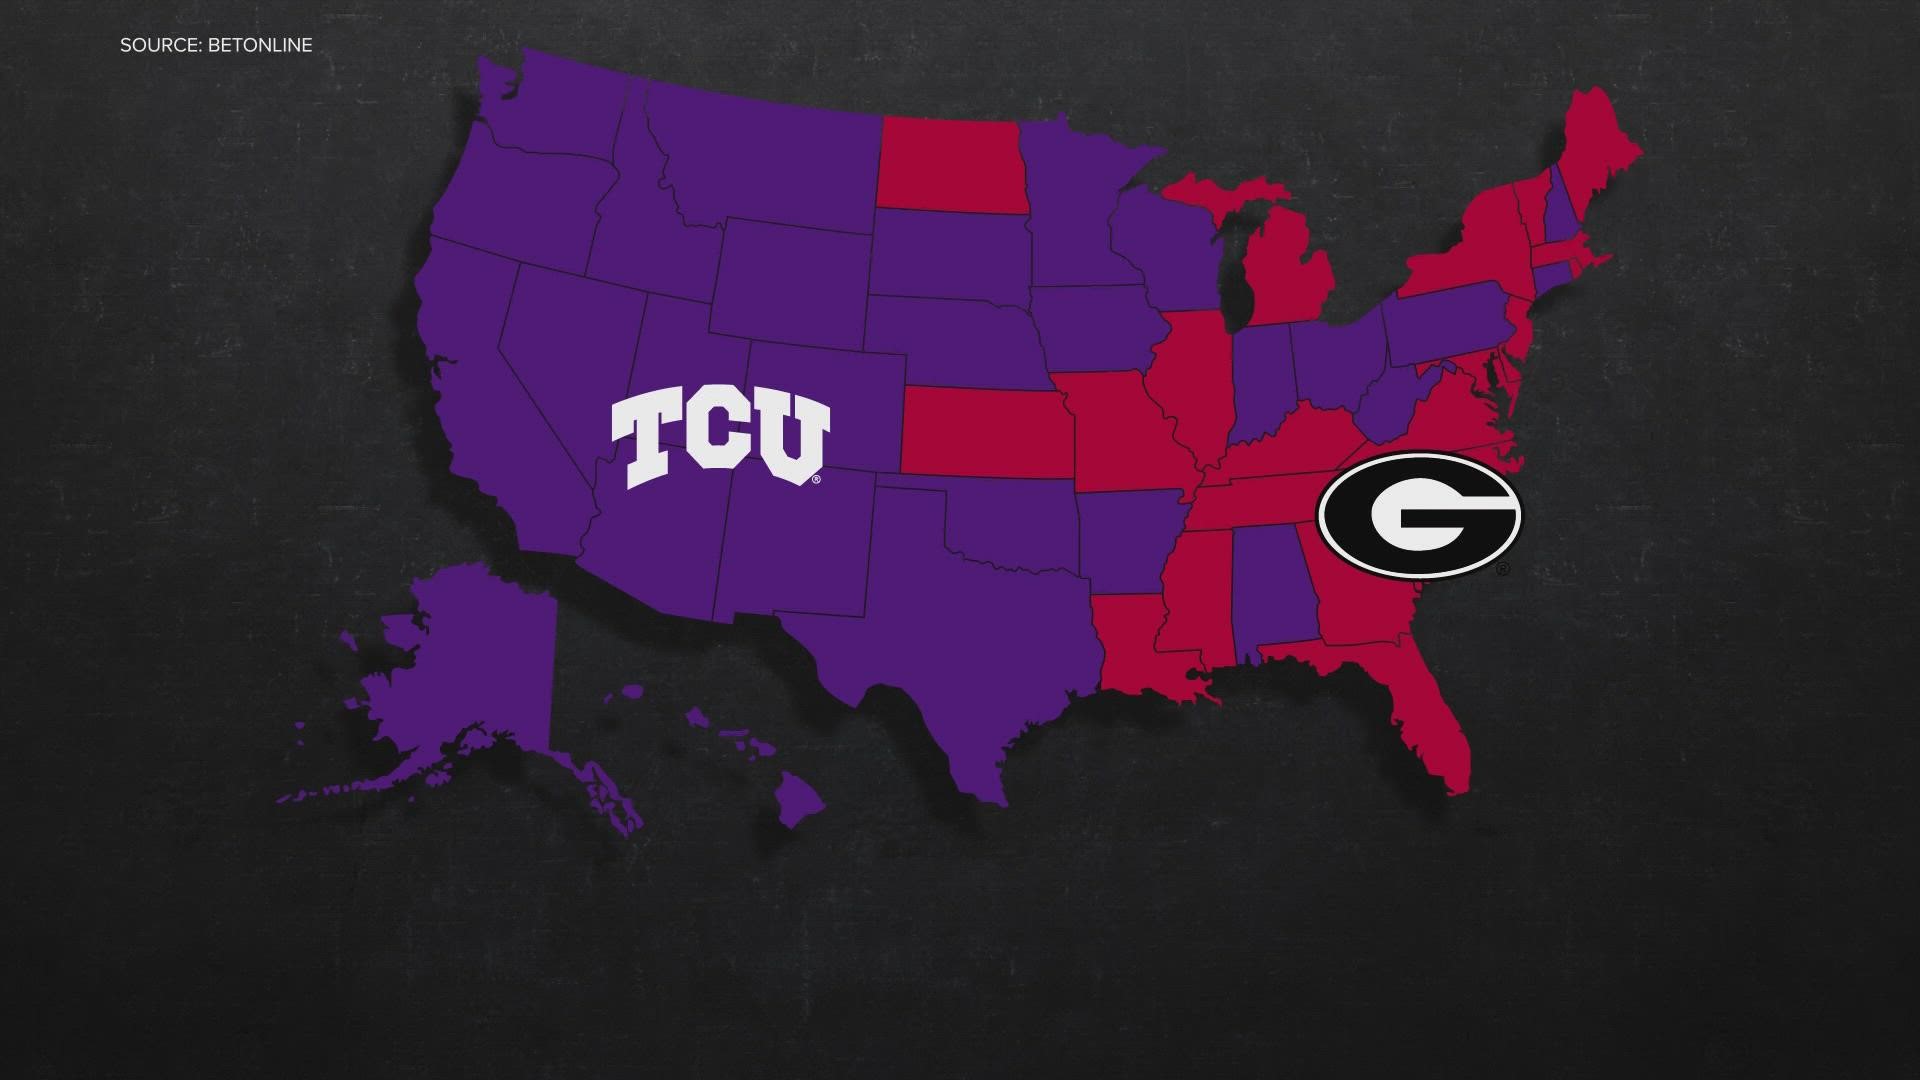 More than half of the country will be rooting for TCU against Georgia, according to survey.